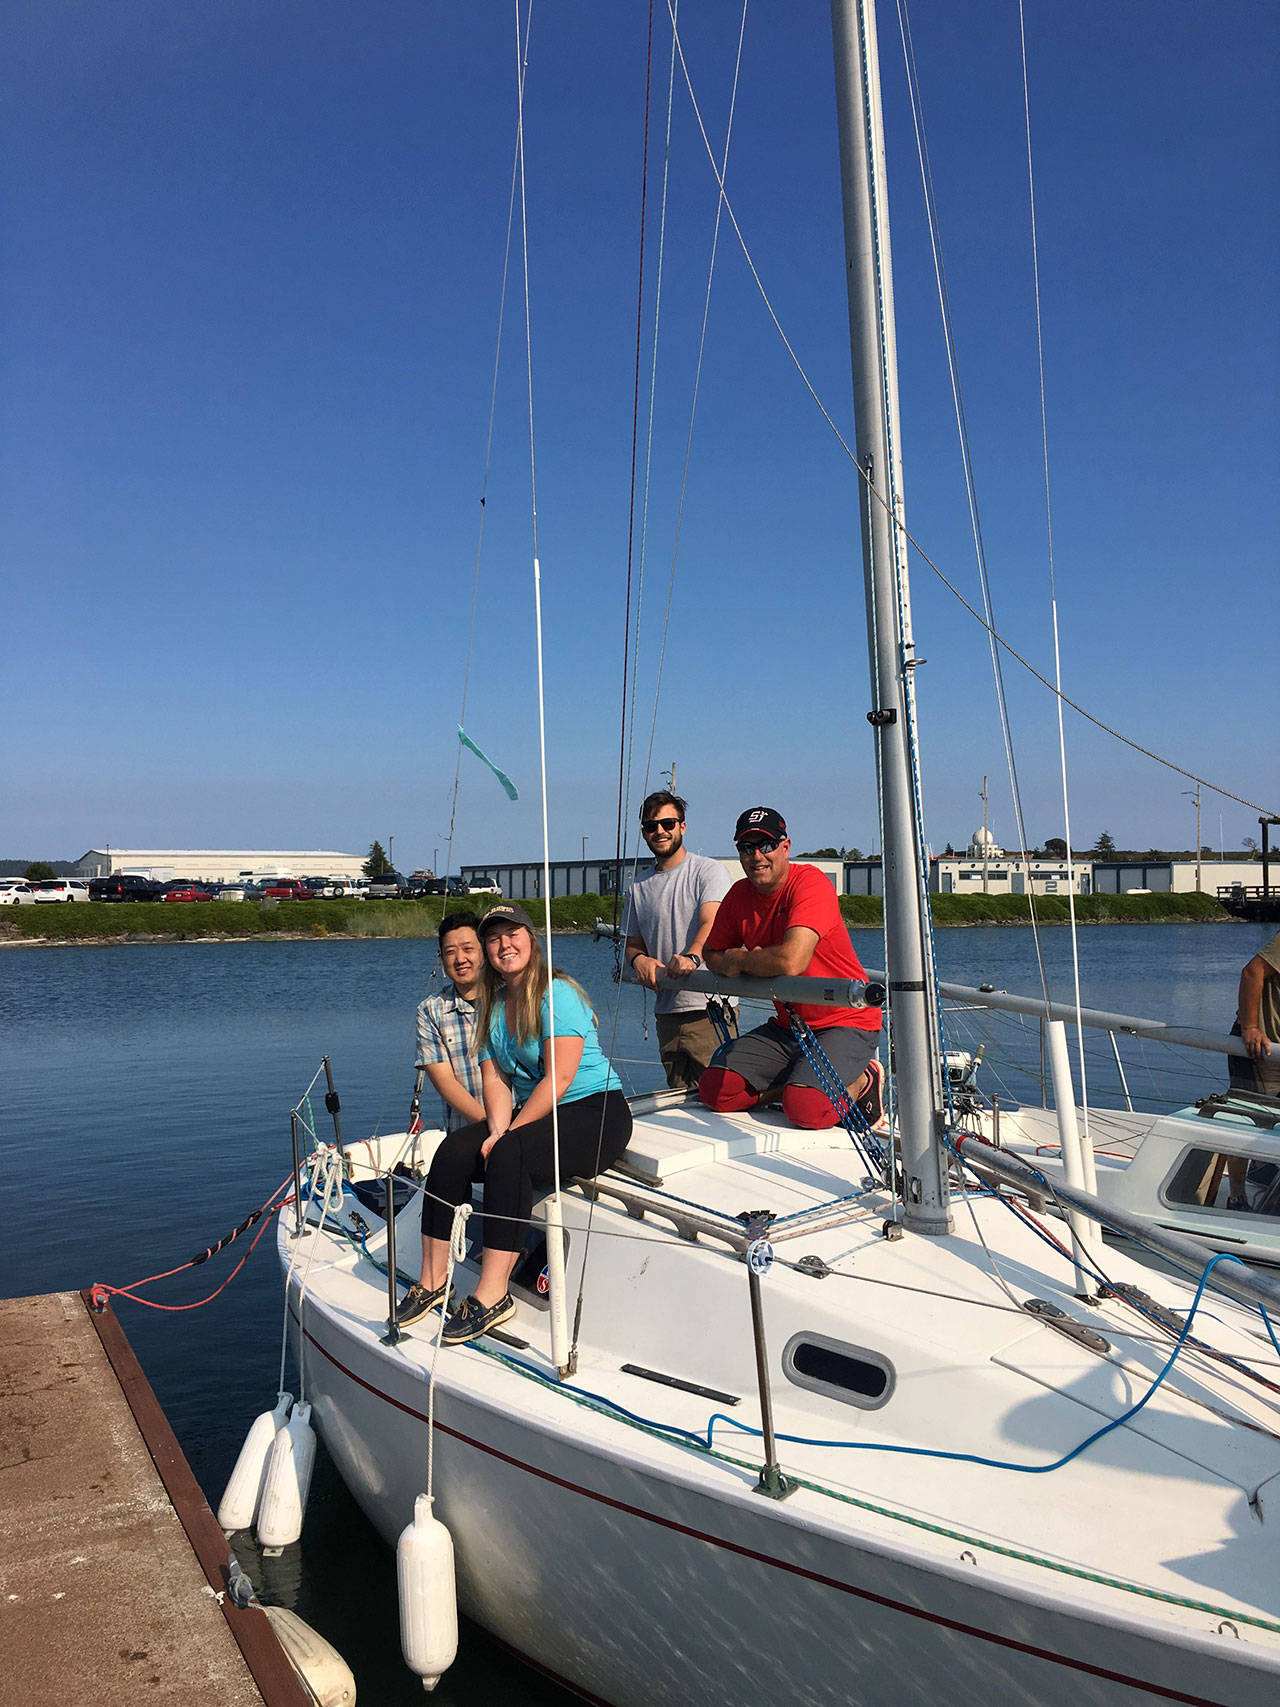 Dave Steckman and the crew of Renaissance won the Oak Harbor Yacht Club’s Flying Sails Fleet Summer Series. (Submitted photo)